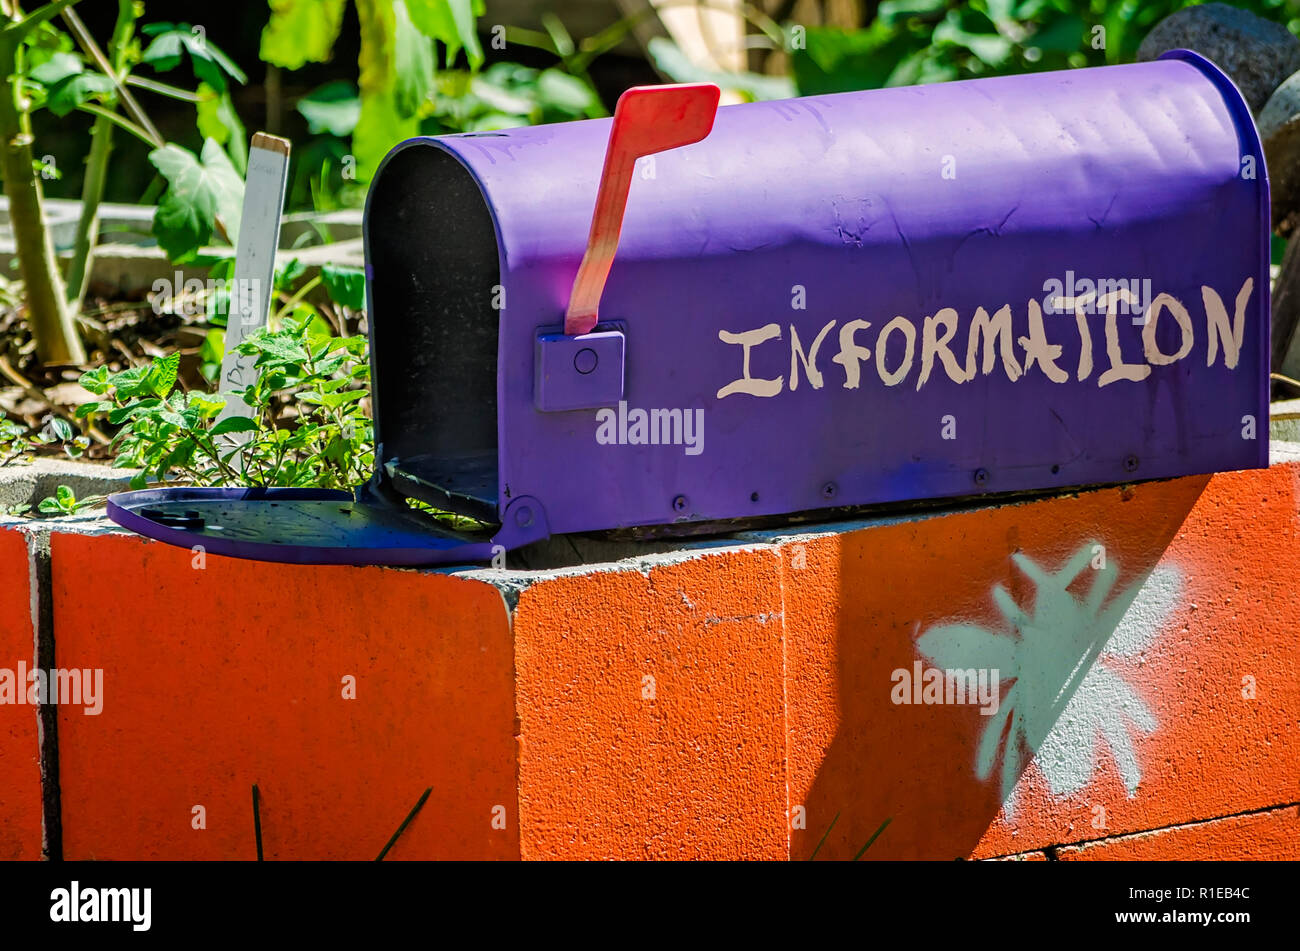 A mailbox provides flyers of information about The Lost Garden, a downtown community garden and art instillation, Nov. 3, 2018, in Mobile, Alabama. Stock Photo